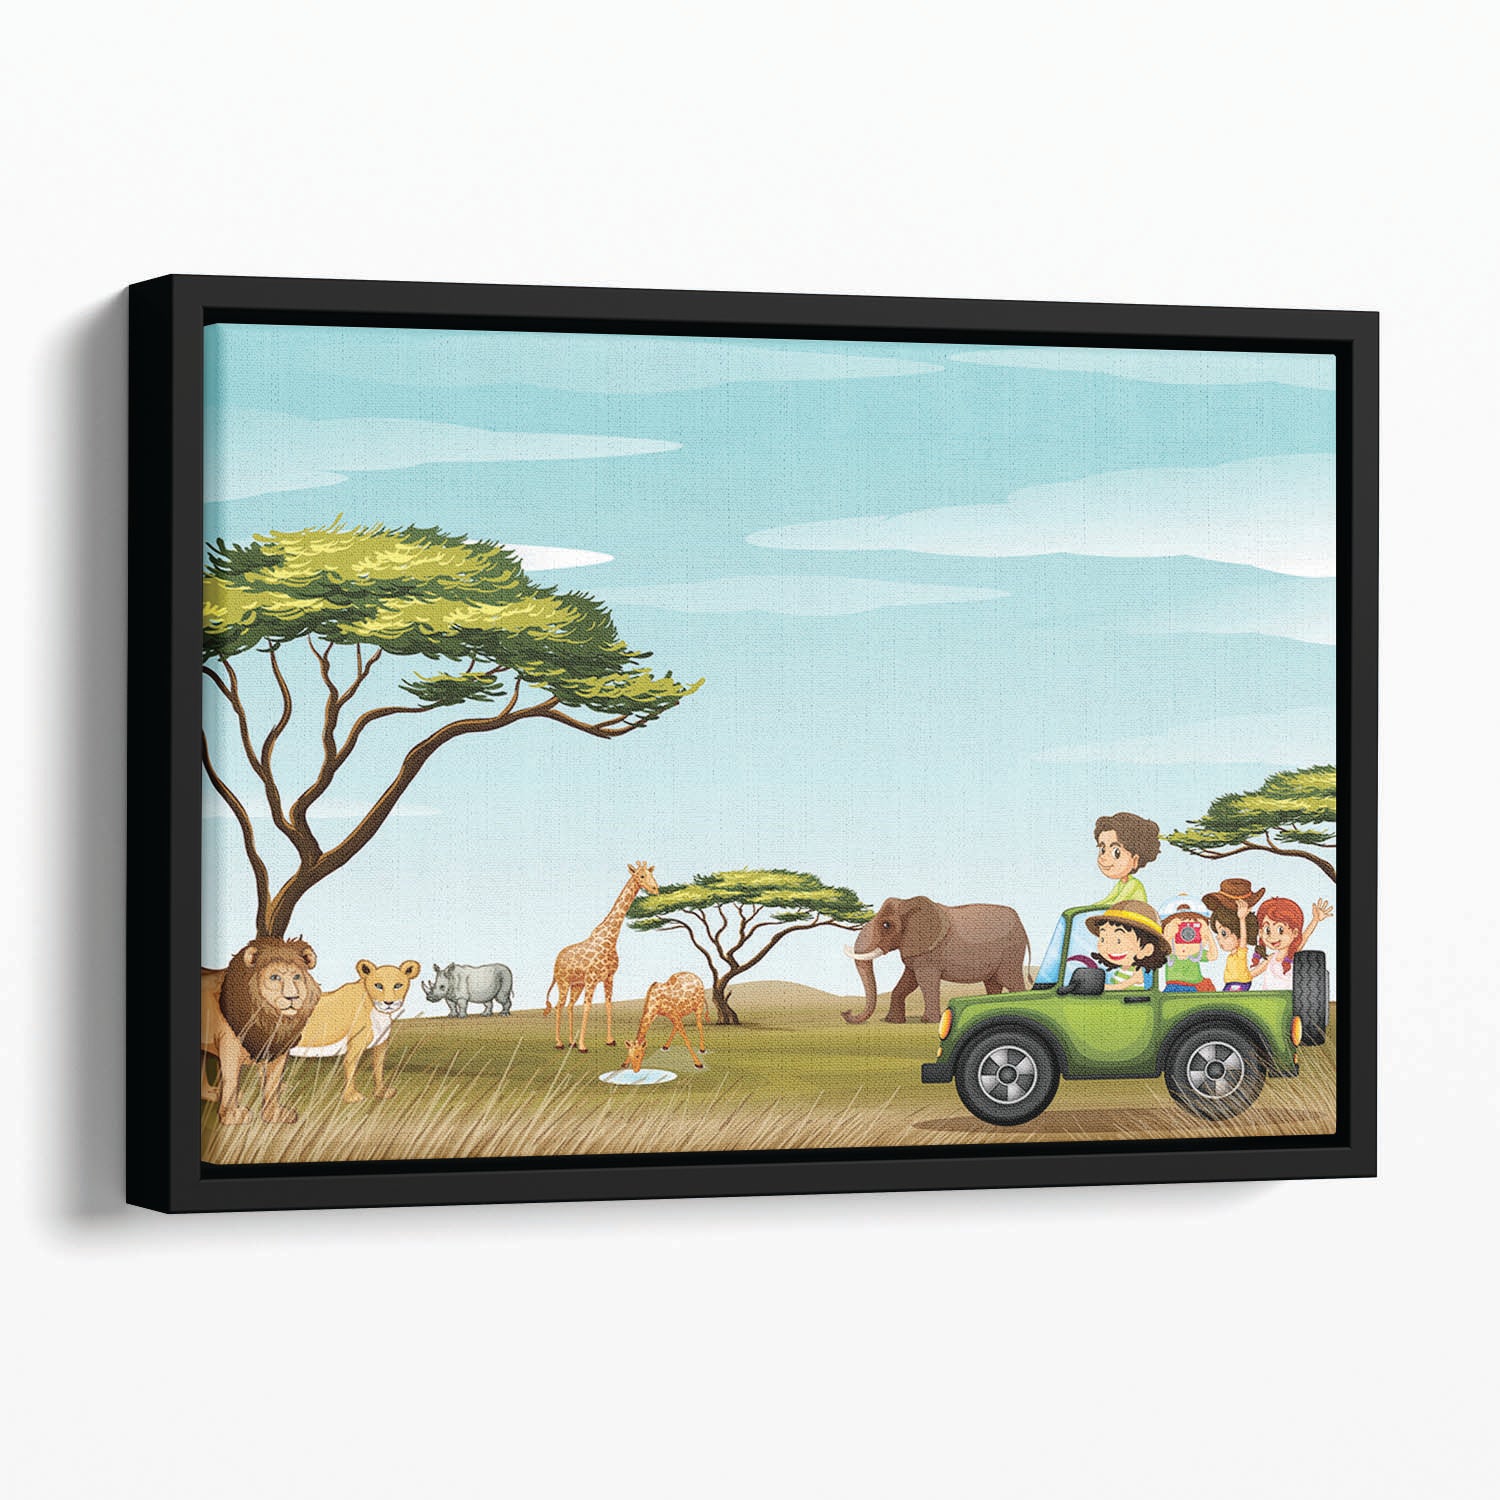 Roadtrip in the field full of animals Floating Framed Canvas